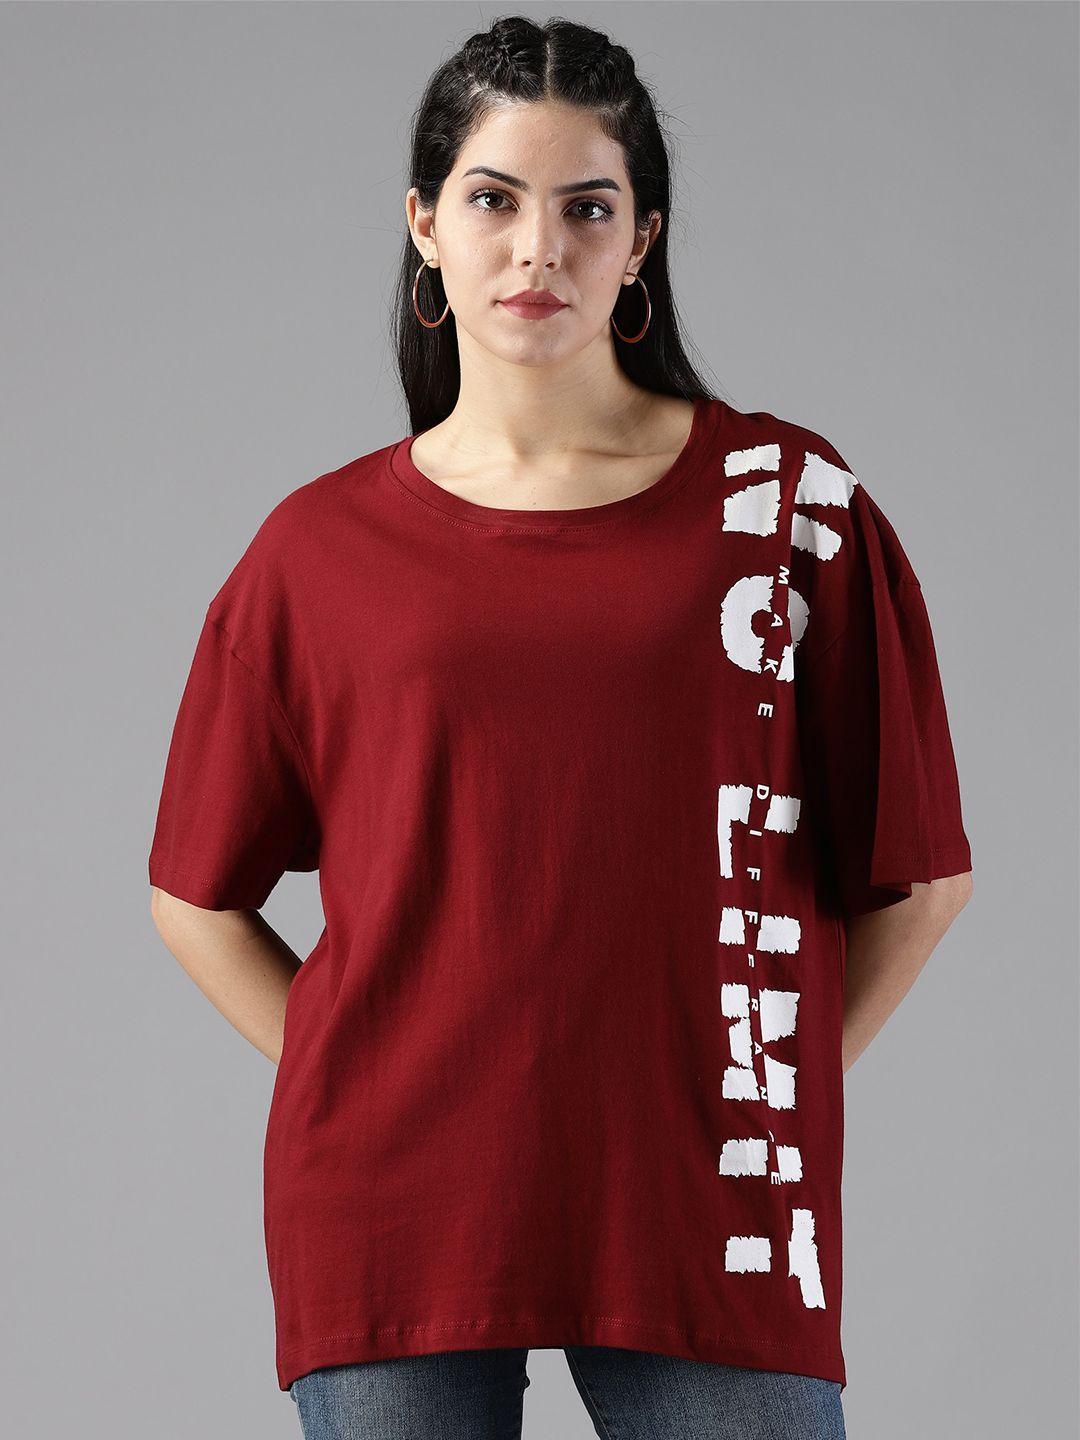 the-roadster-lifestyle-co.-printed-pure-cotton-oversized-t-shirt